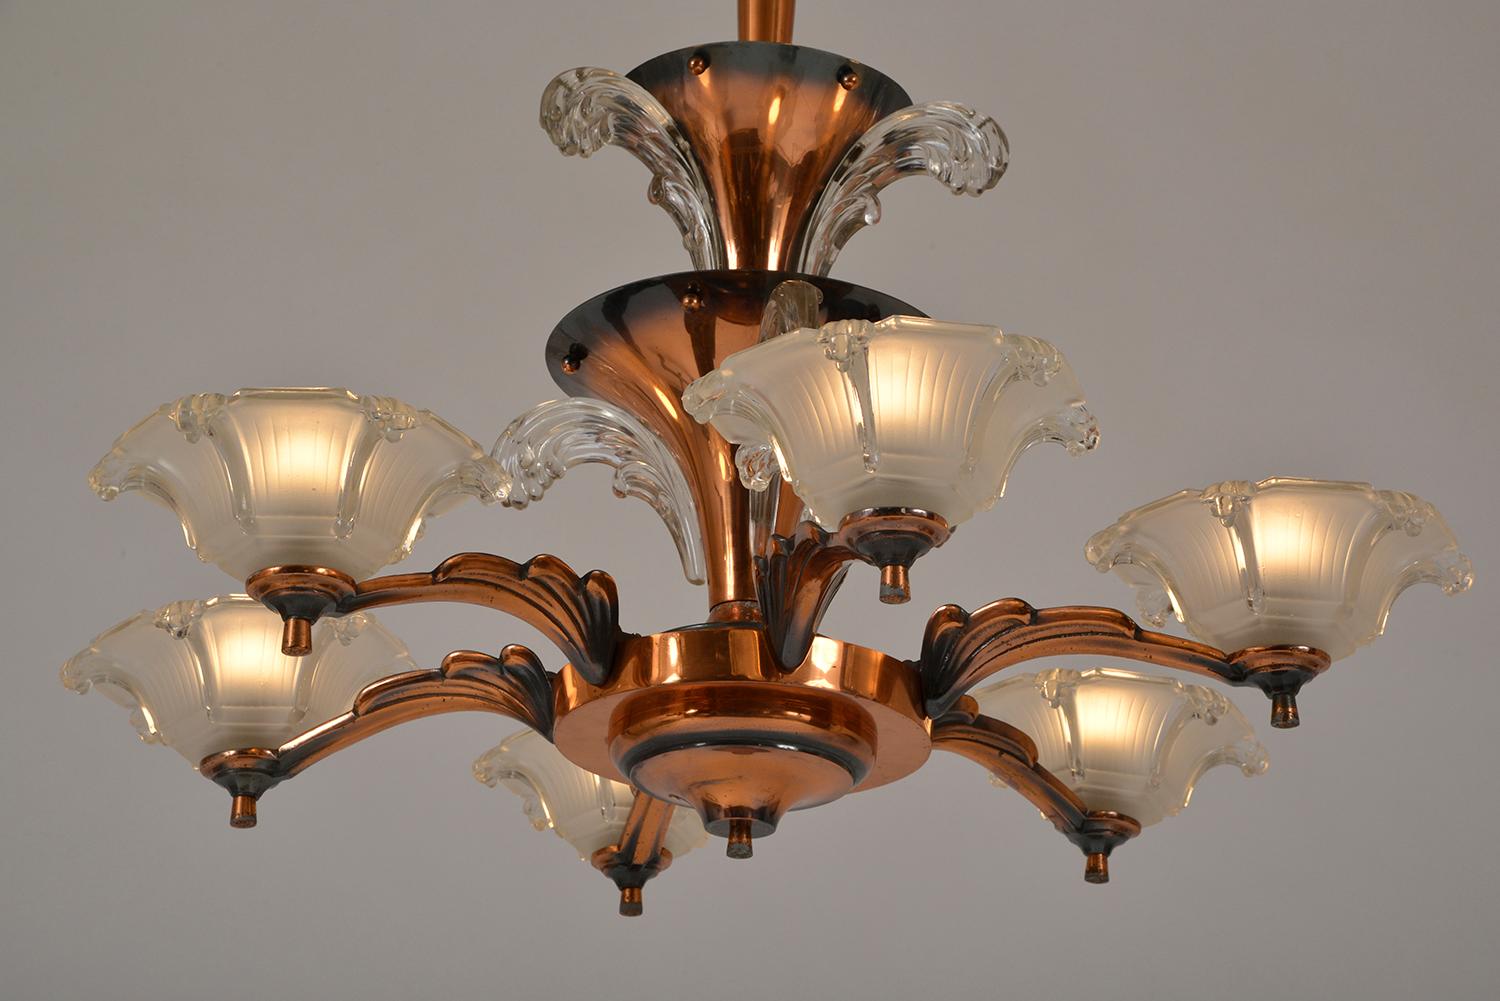 1930s French Art Deco 6-Arm Chandelier by Petitot and Ezan Copper and Glass For Sale 8